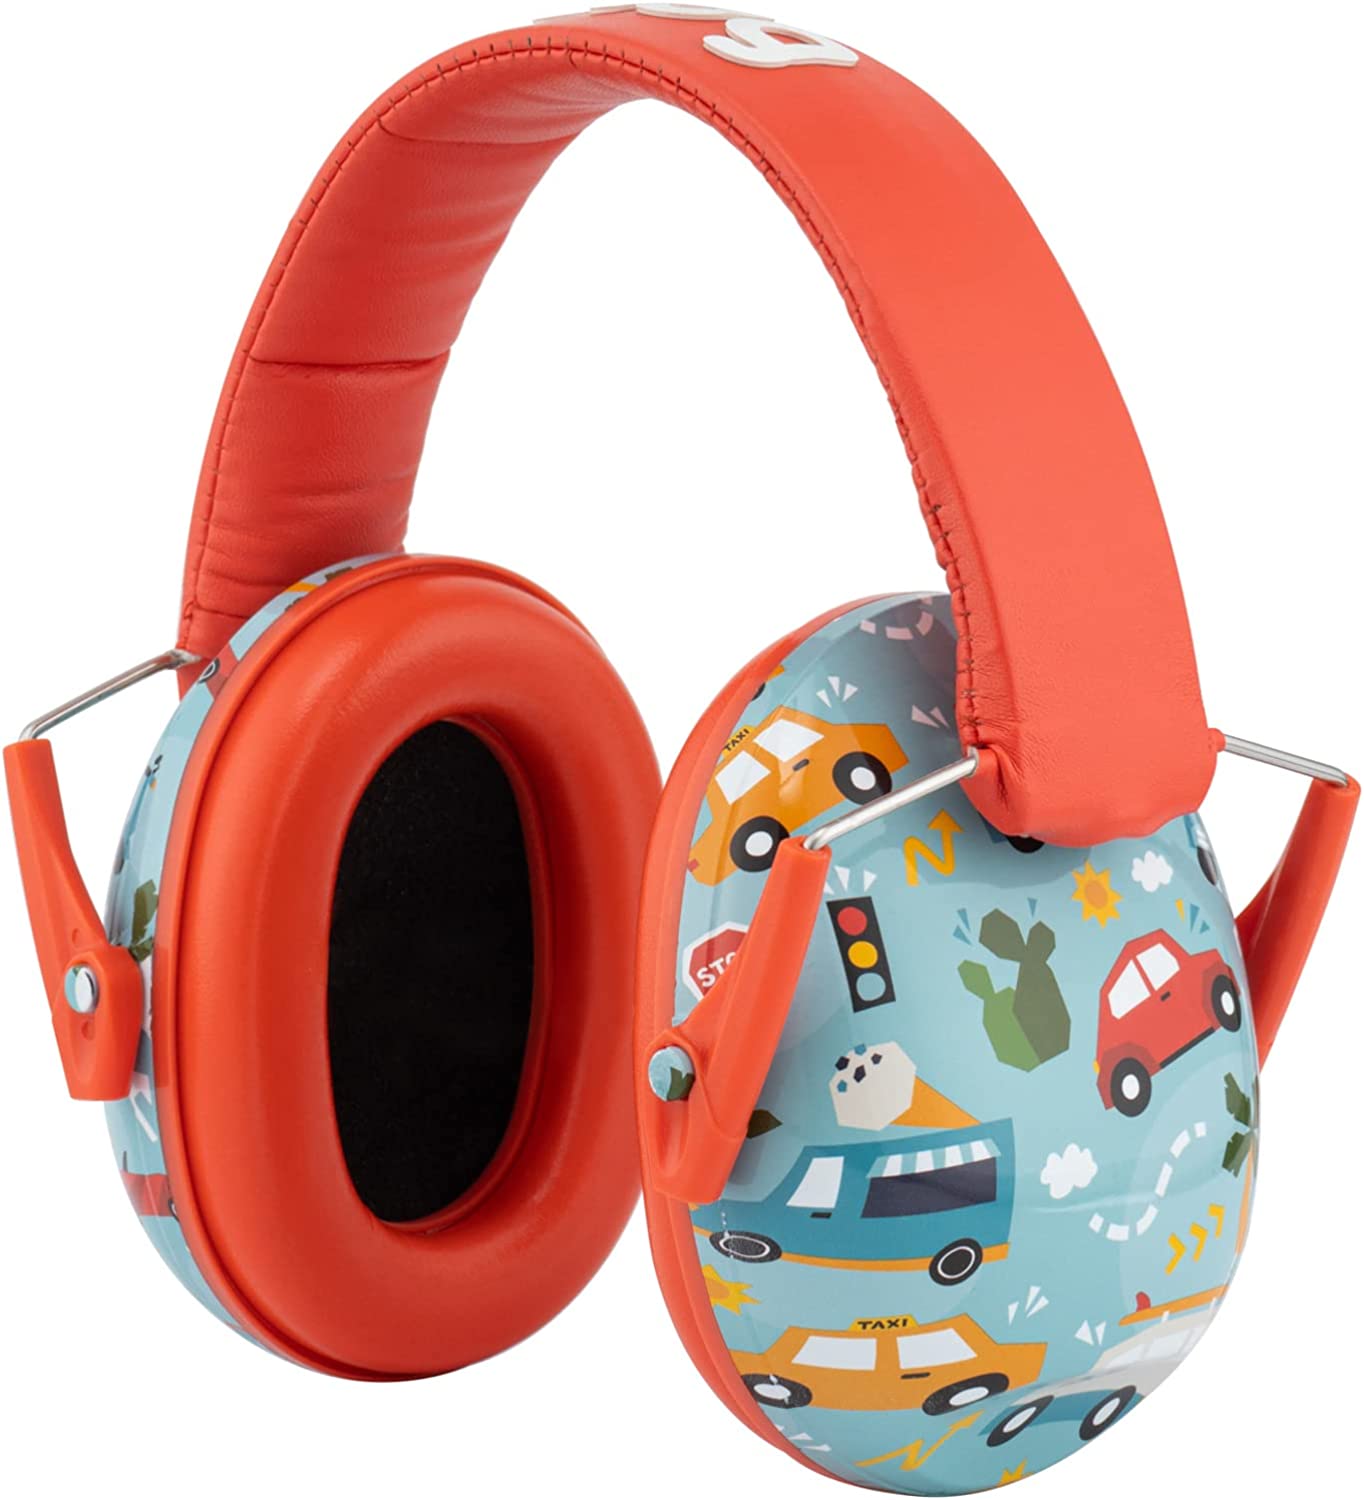 Snug Kids Ear Protection - Noise Cancelling Sound Proof Earmuffs Headphones for Toddlers, Children & Adults